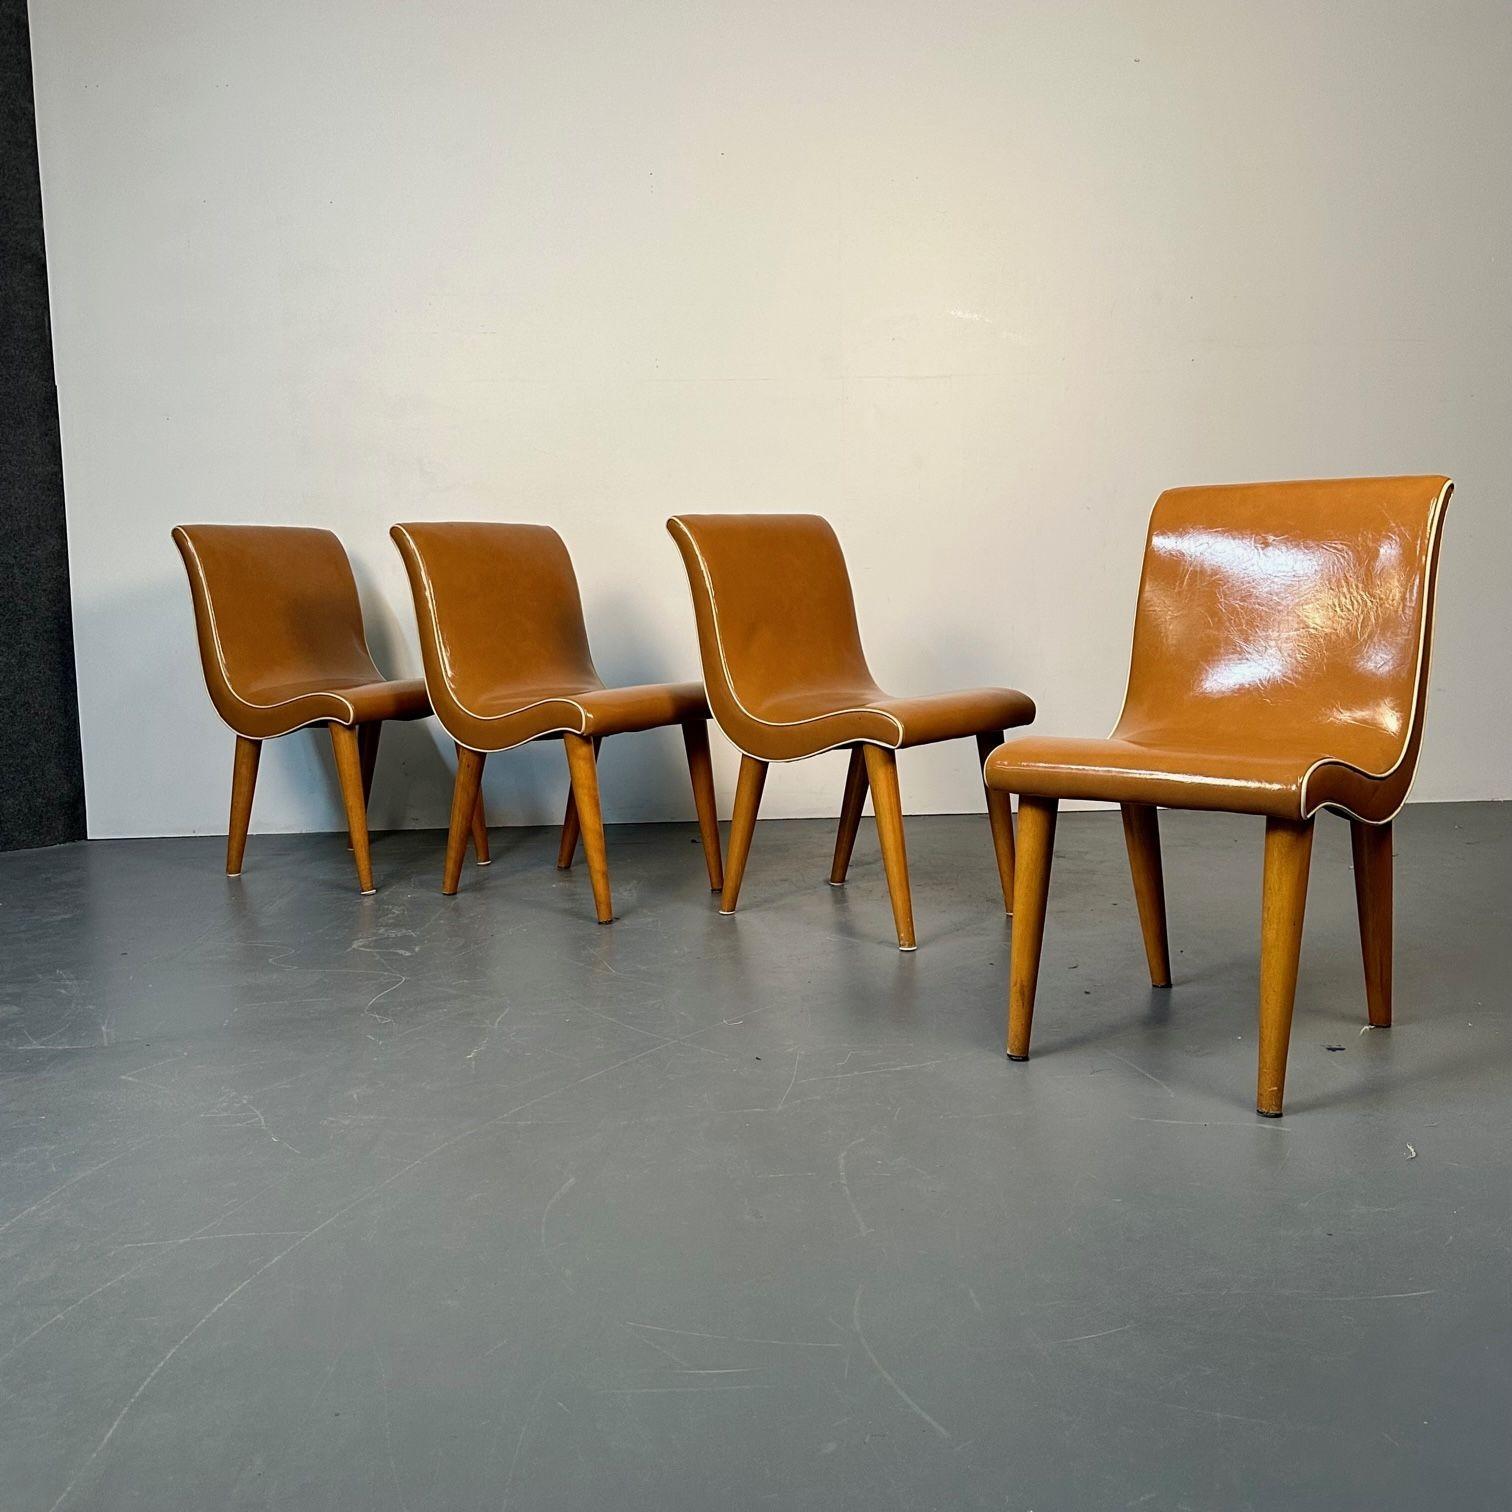 Four American Mid-Century Modern Curvy Dining / Side Chairs by Russel Wright In Good Condition For Sale In Stamford, CT